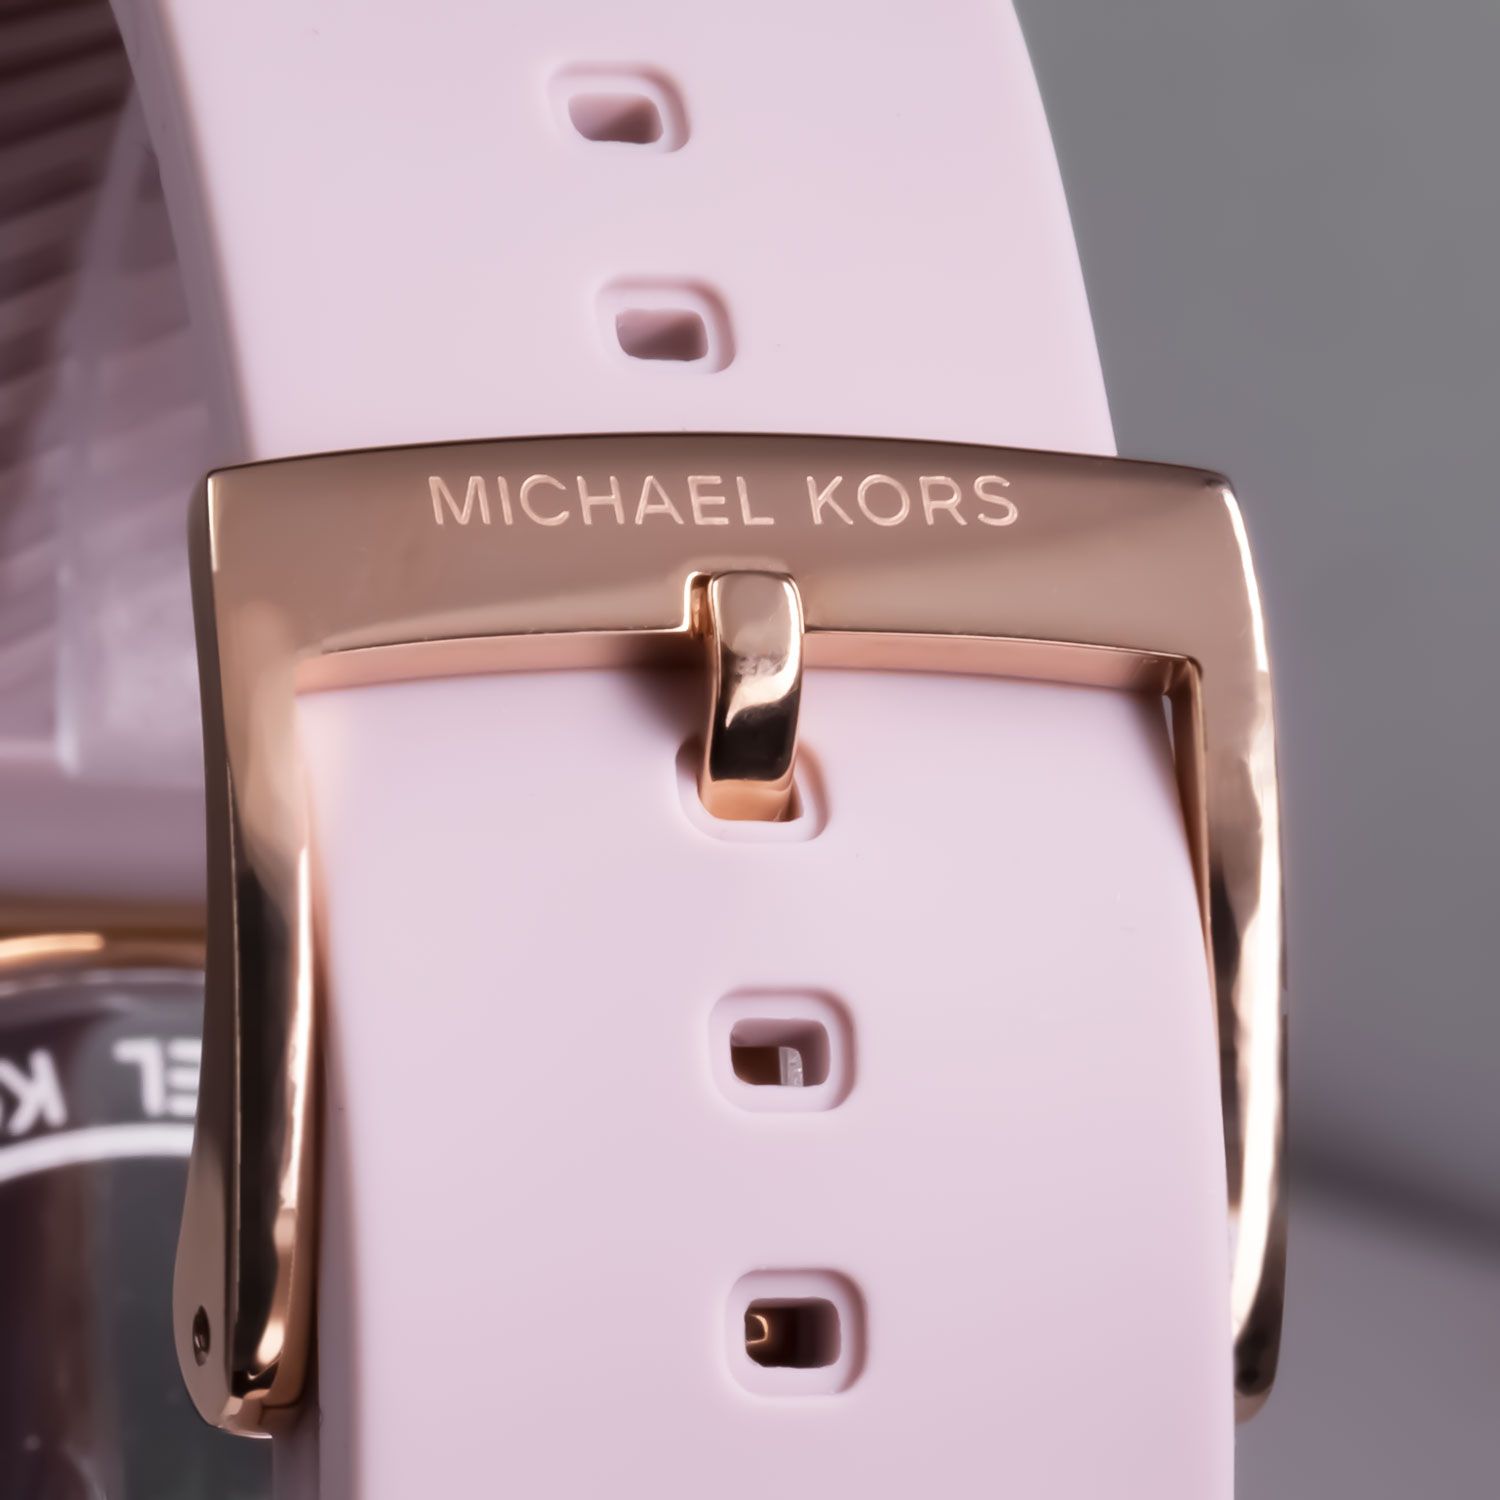 ĐỒNG HỒ NỮ MICHAEL KORS RUNWAY JANELLE ROSE GOLD PINK SILICONE WATCH MK7139 4